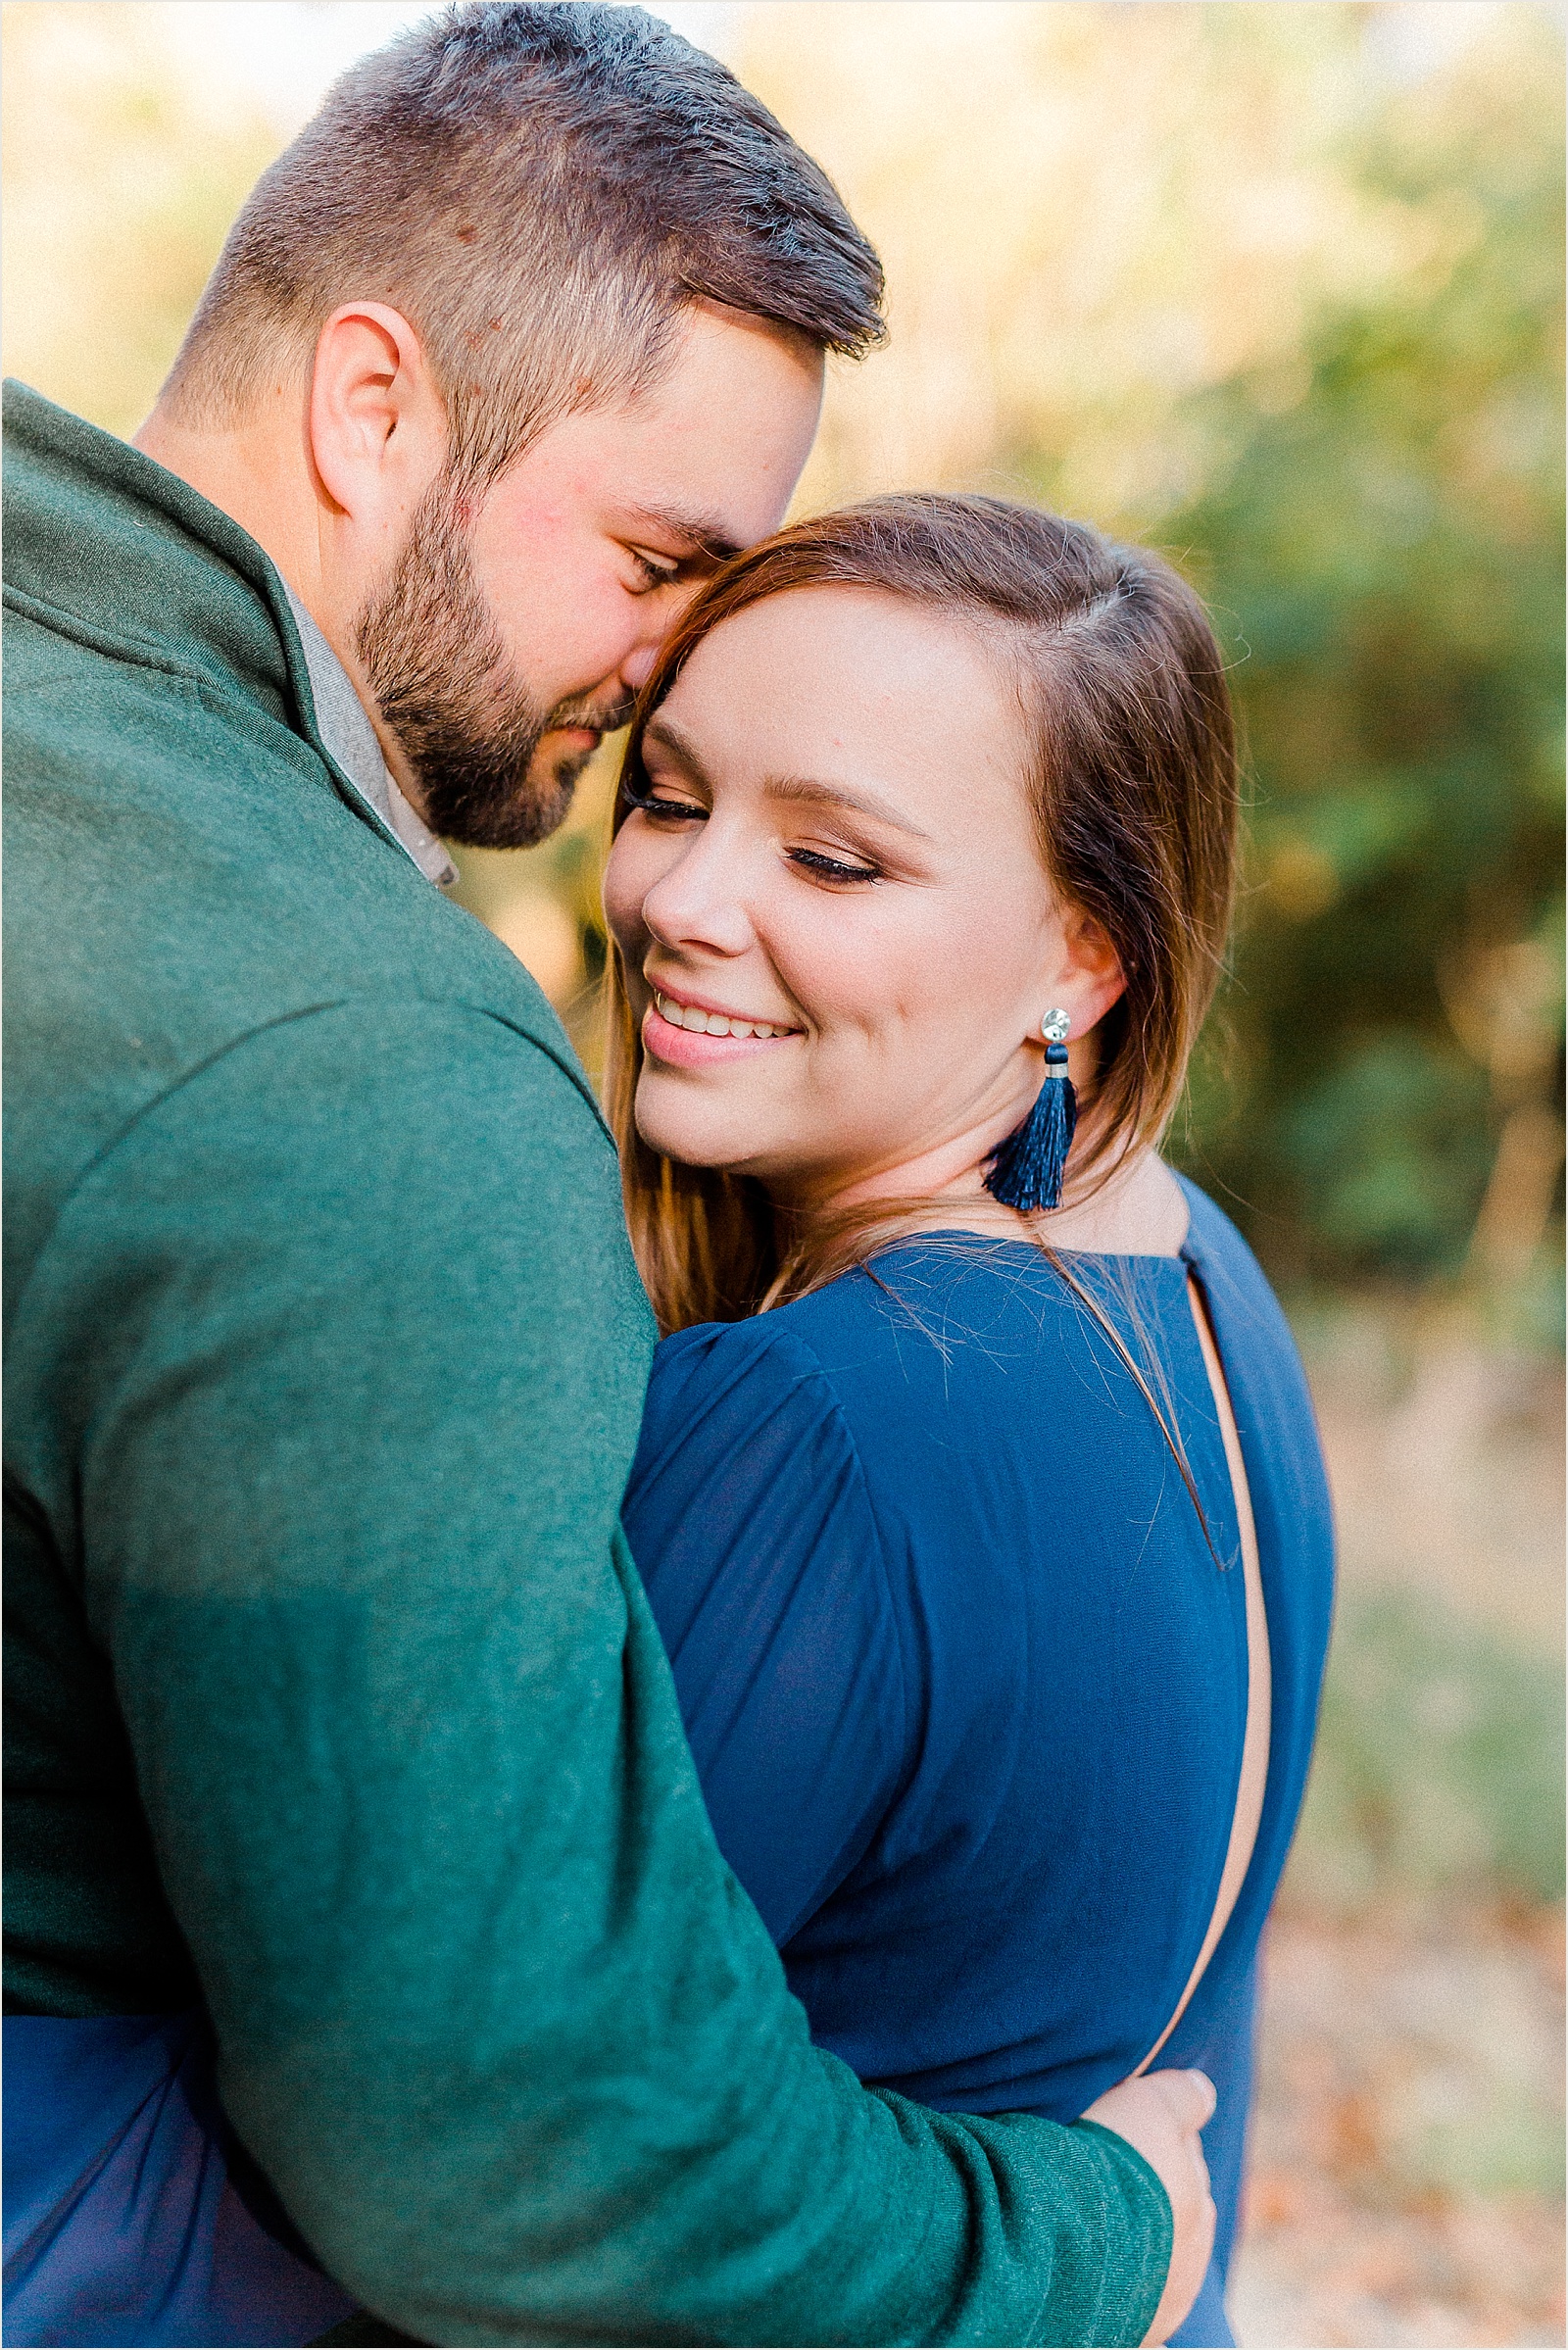 Wrightsville PA Engagement Photographer